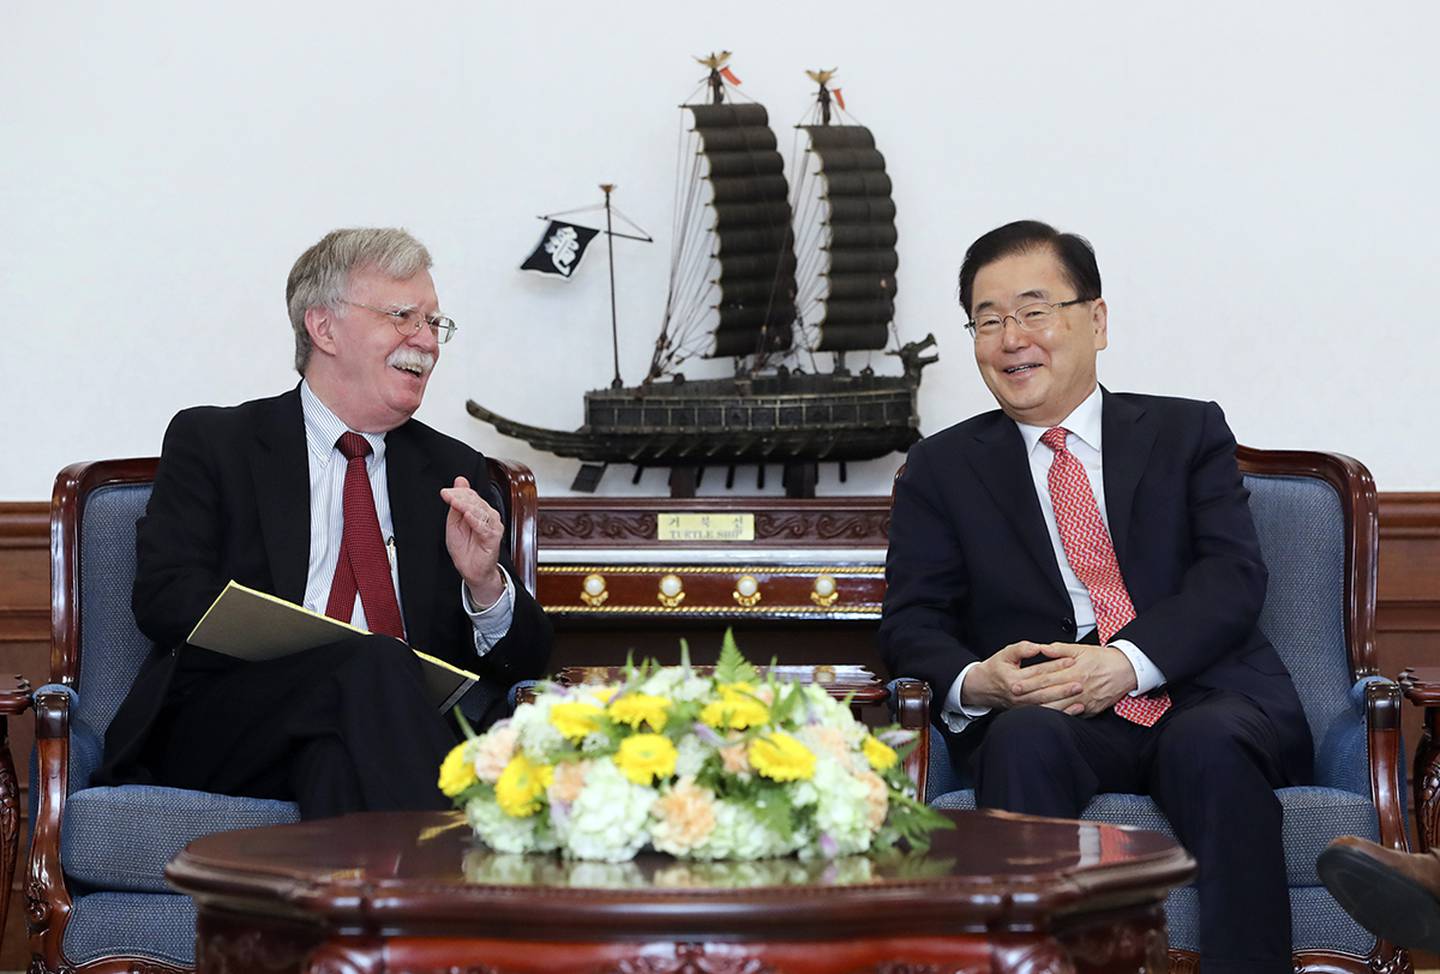 U.S. National Security Adviser John Bolton, left, talks with South Korean National Security Adviser Chung Eui-yong during a meeting at the presidential Blue House in Seoul, South Korea, Wednesday, July 24, 2019.